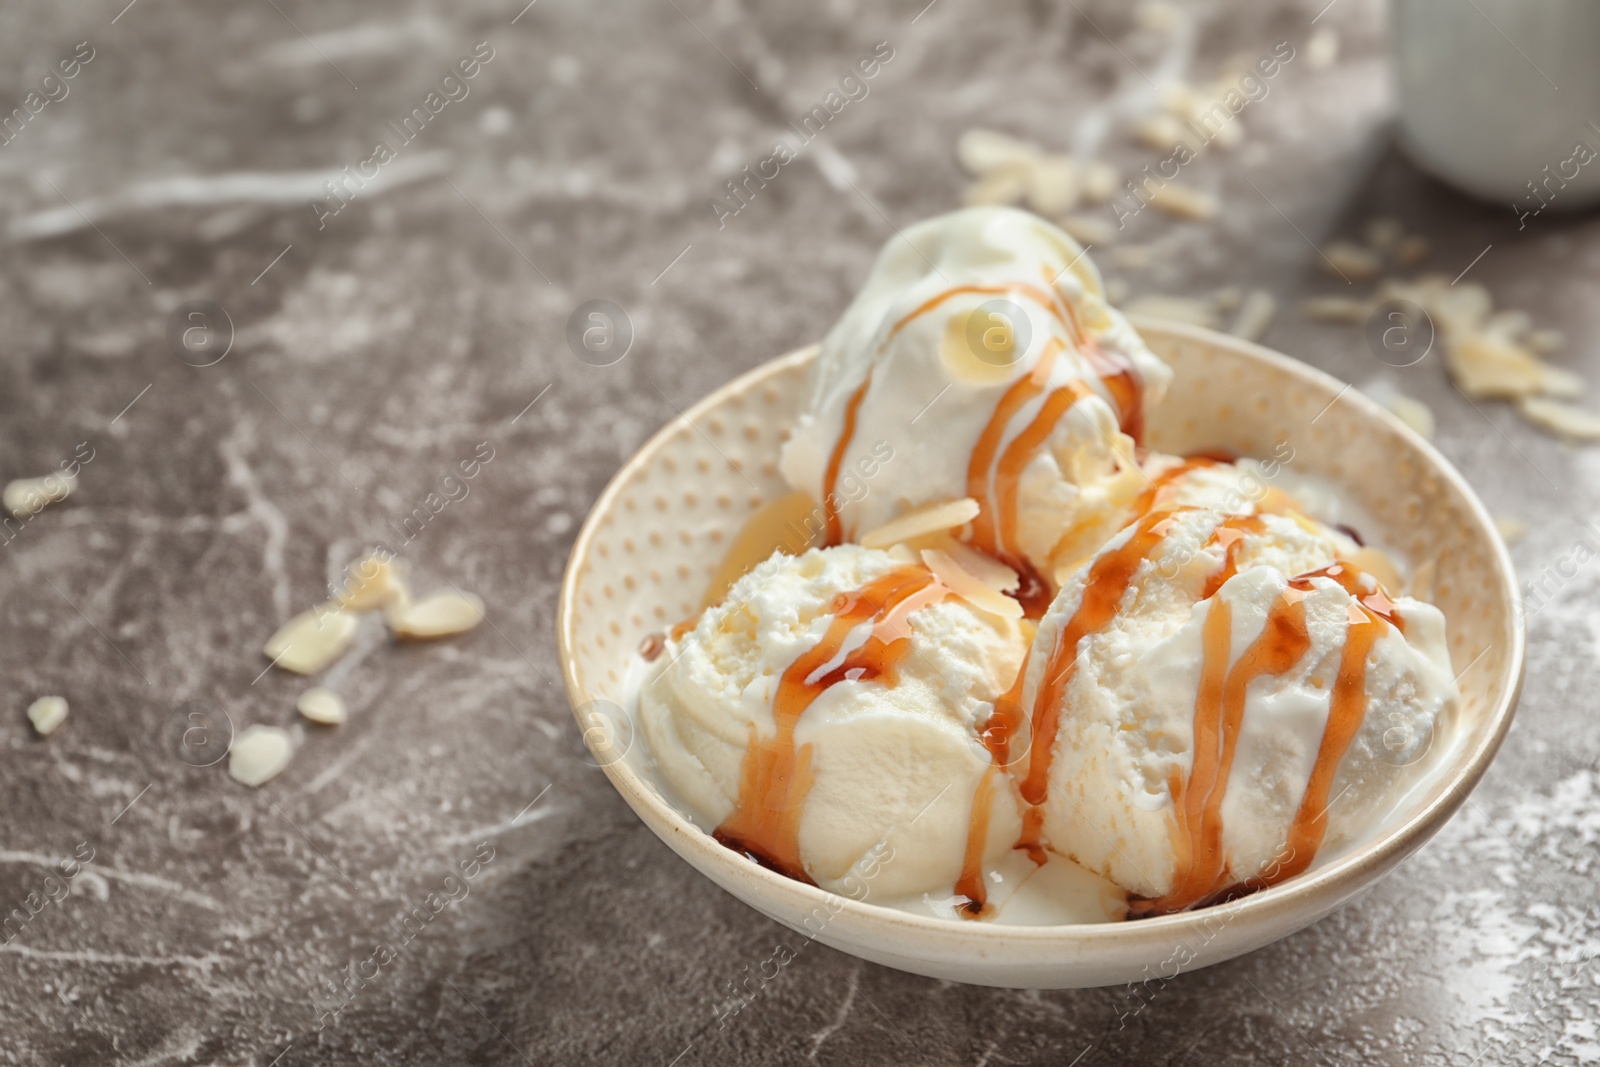 Photo of Tasty ice cream with caramel sauce in bowl on table